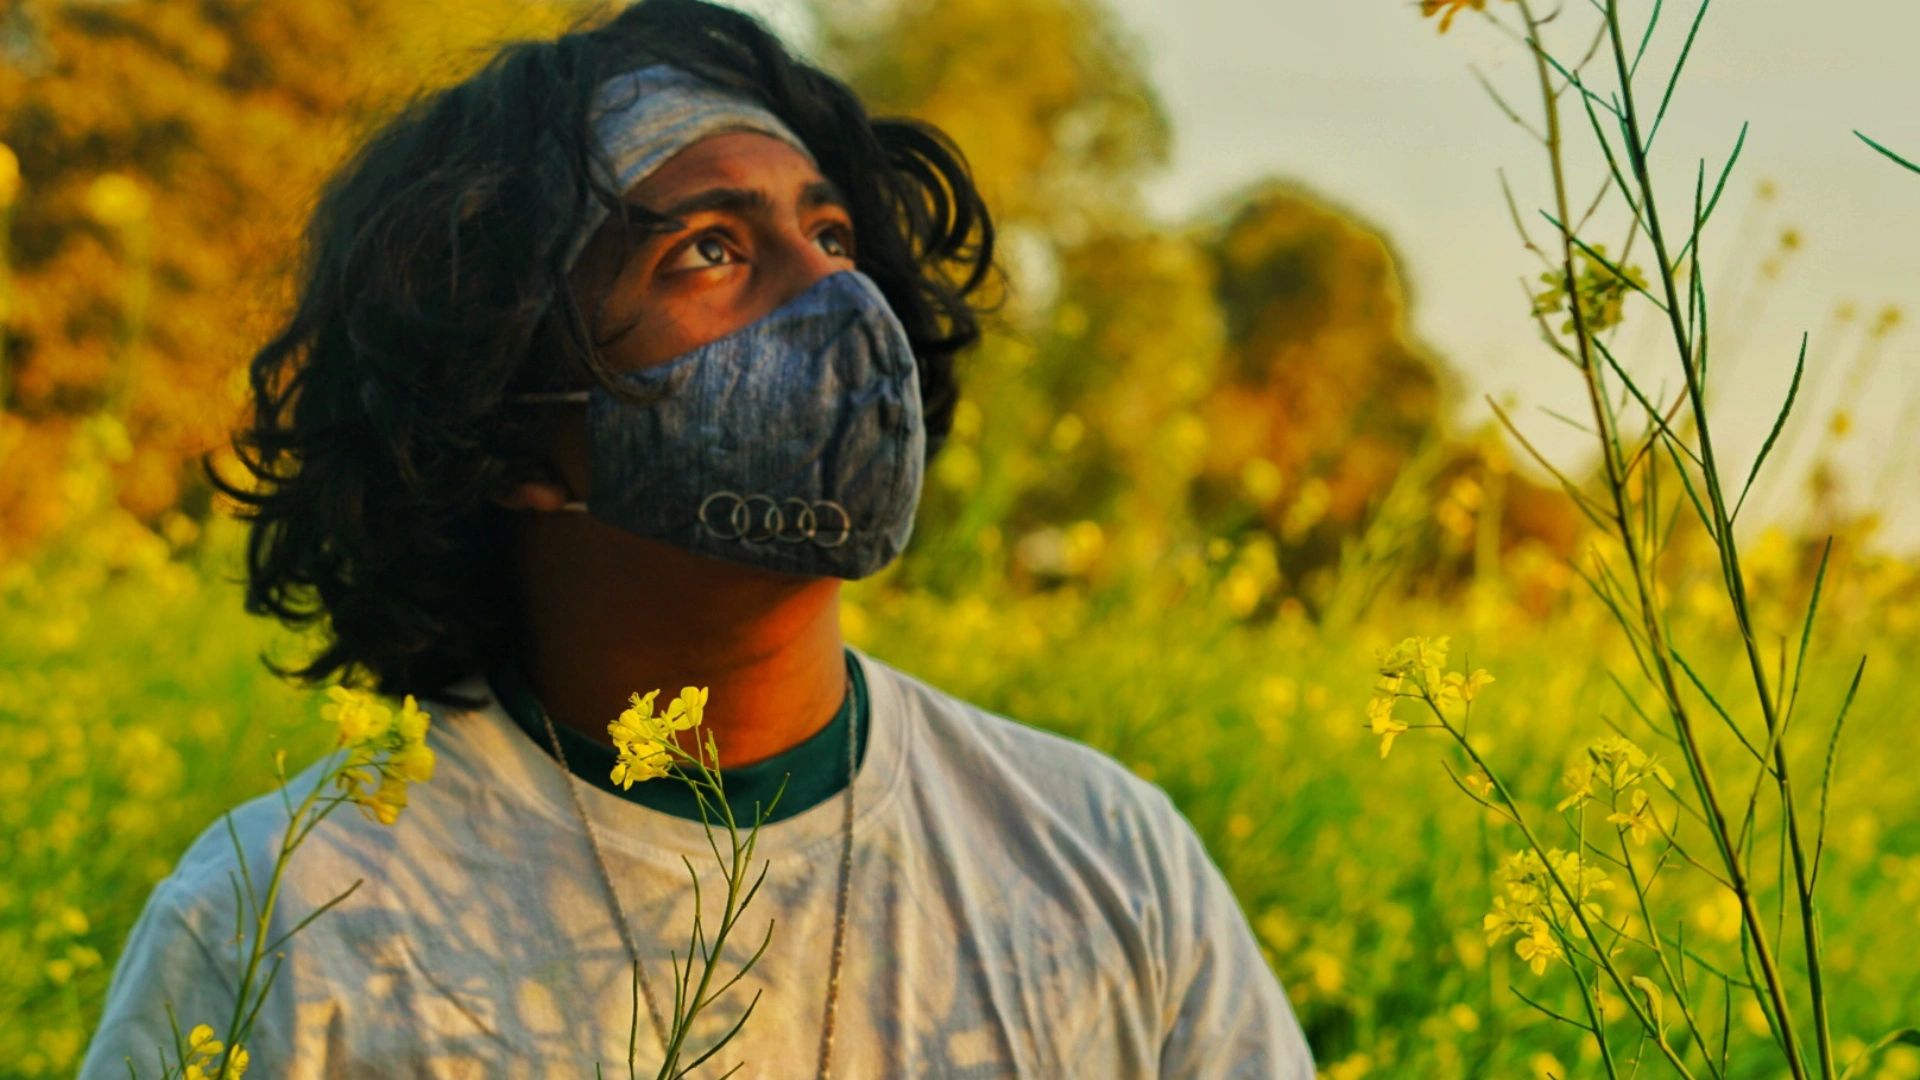 Long Haired Boy with Mask in a field of yellow flowers
